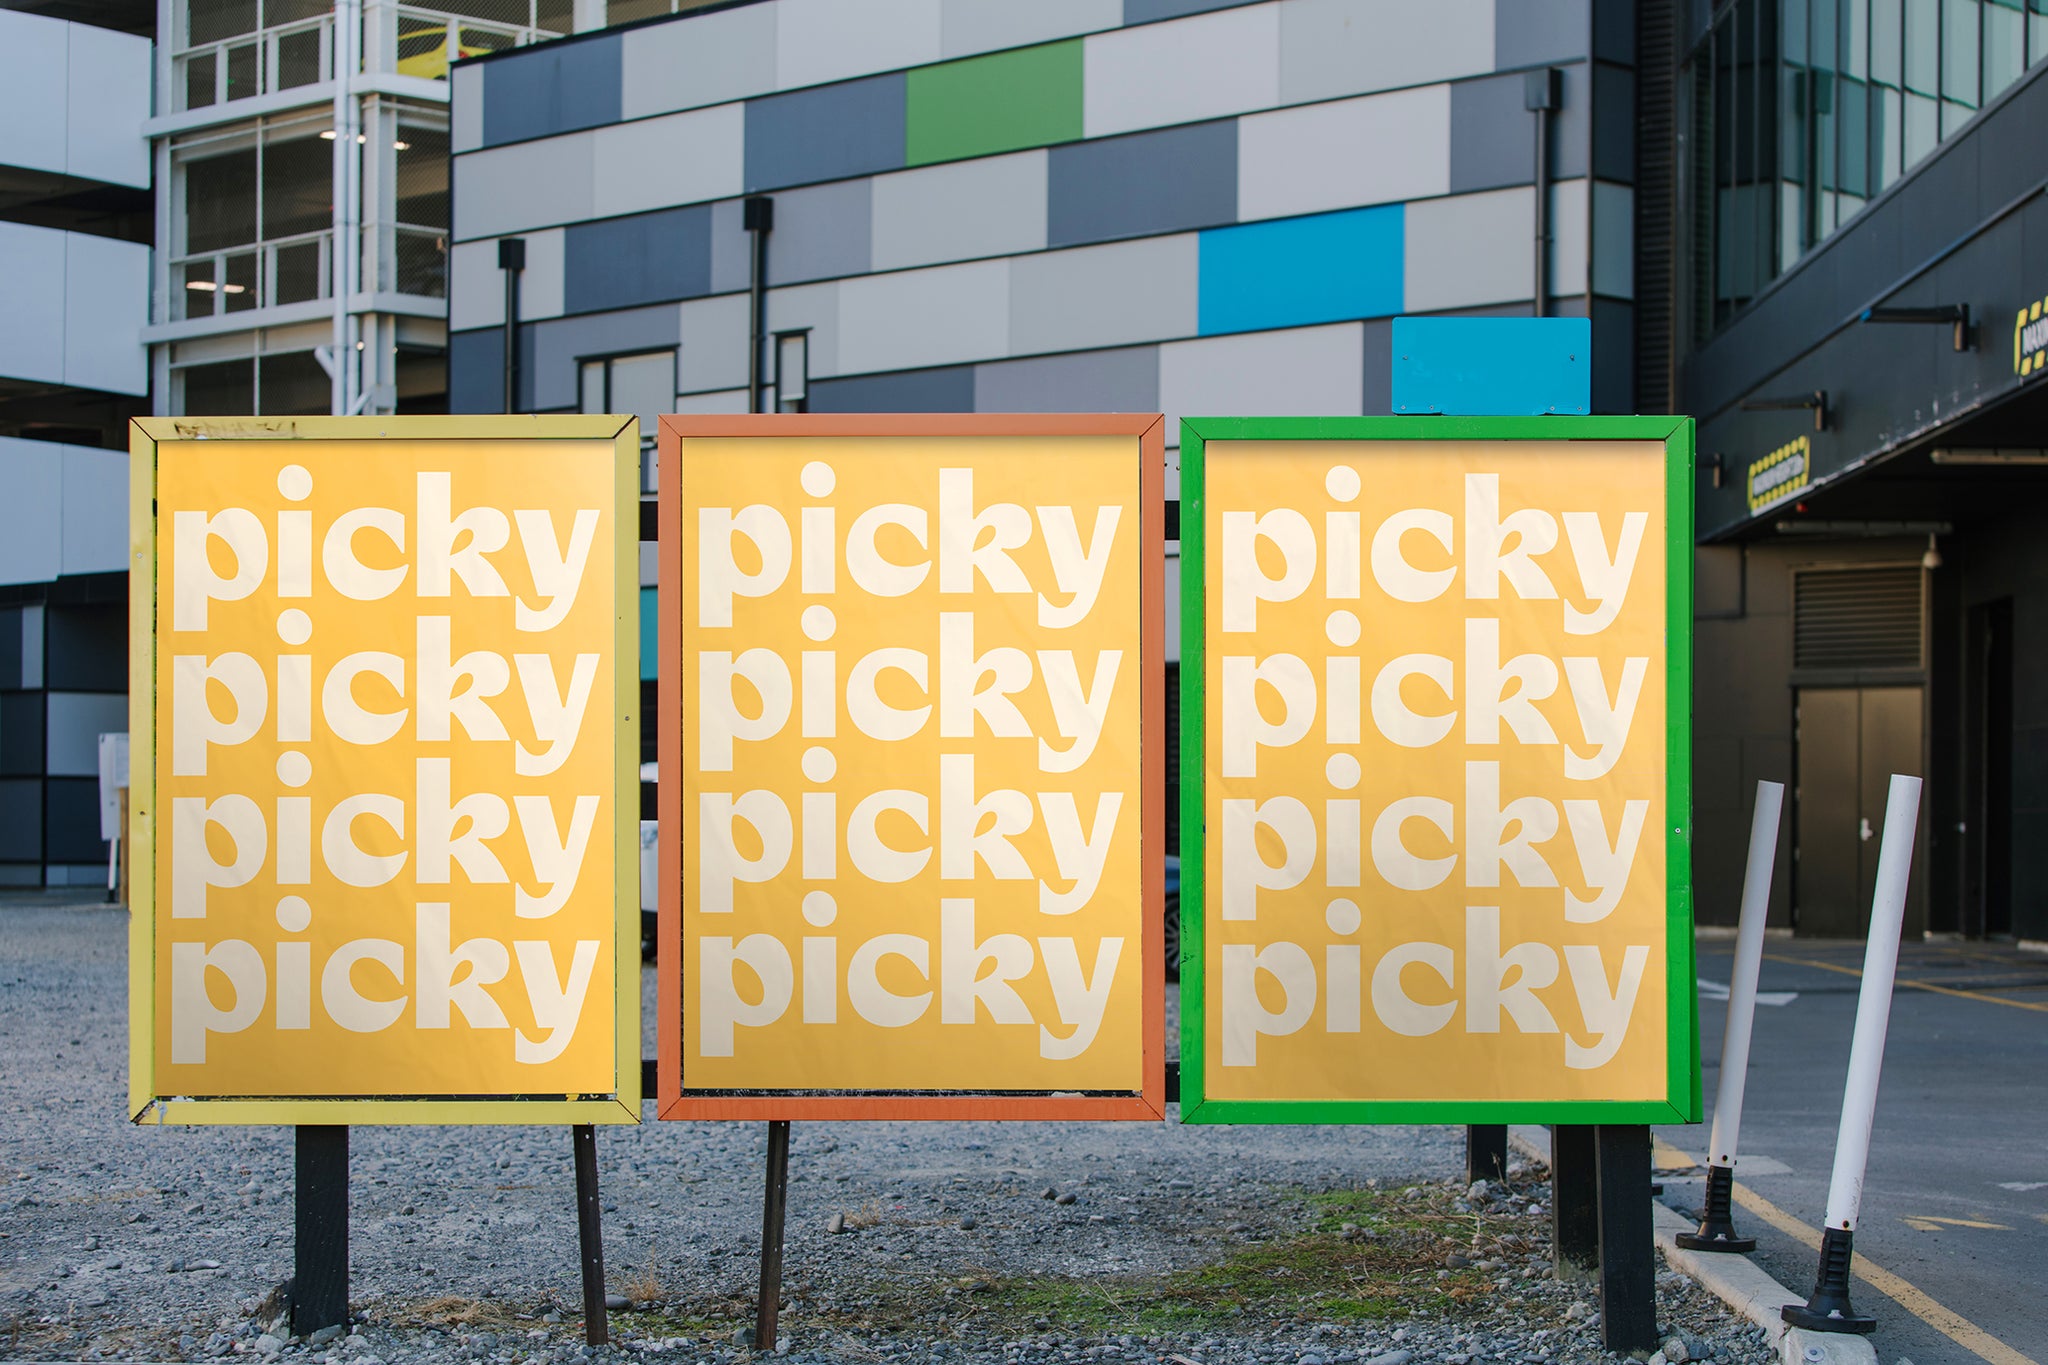 Series of three colourful street posters freestanding against colourful building.